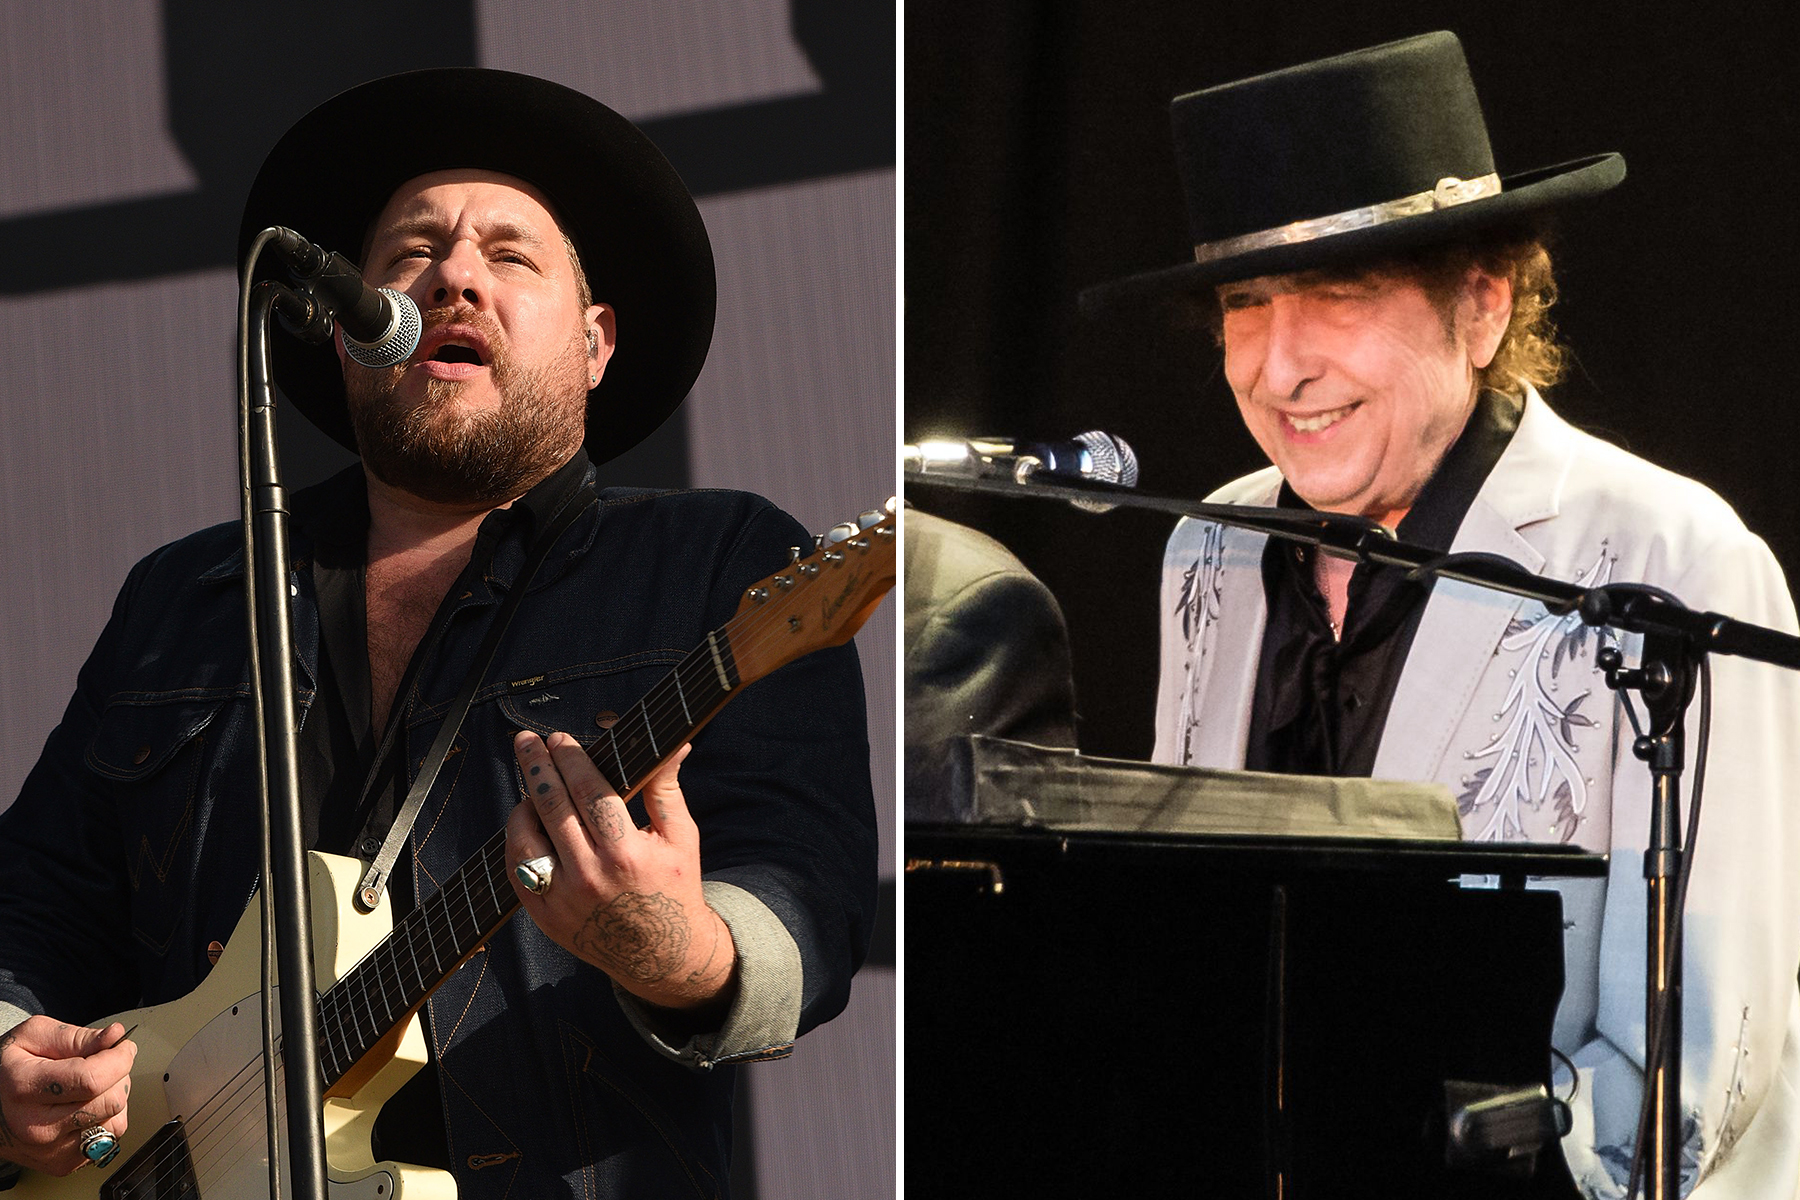 Bob Dylan, Nathaniel Rateliff and The Night Sweats & The Hot Club of Cowtown [CANCELLED] at Greek Theatre Berkeley